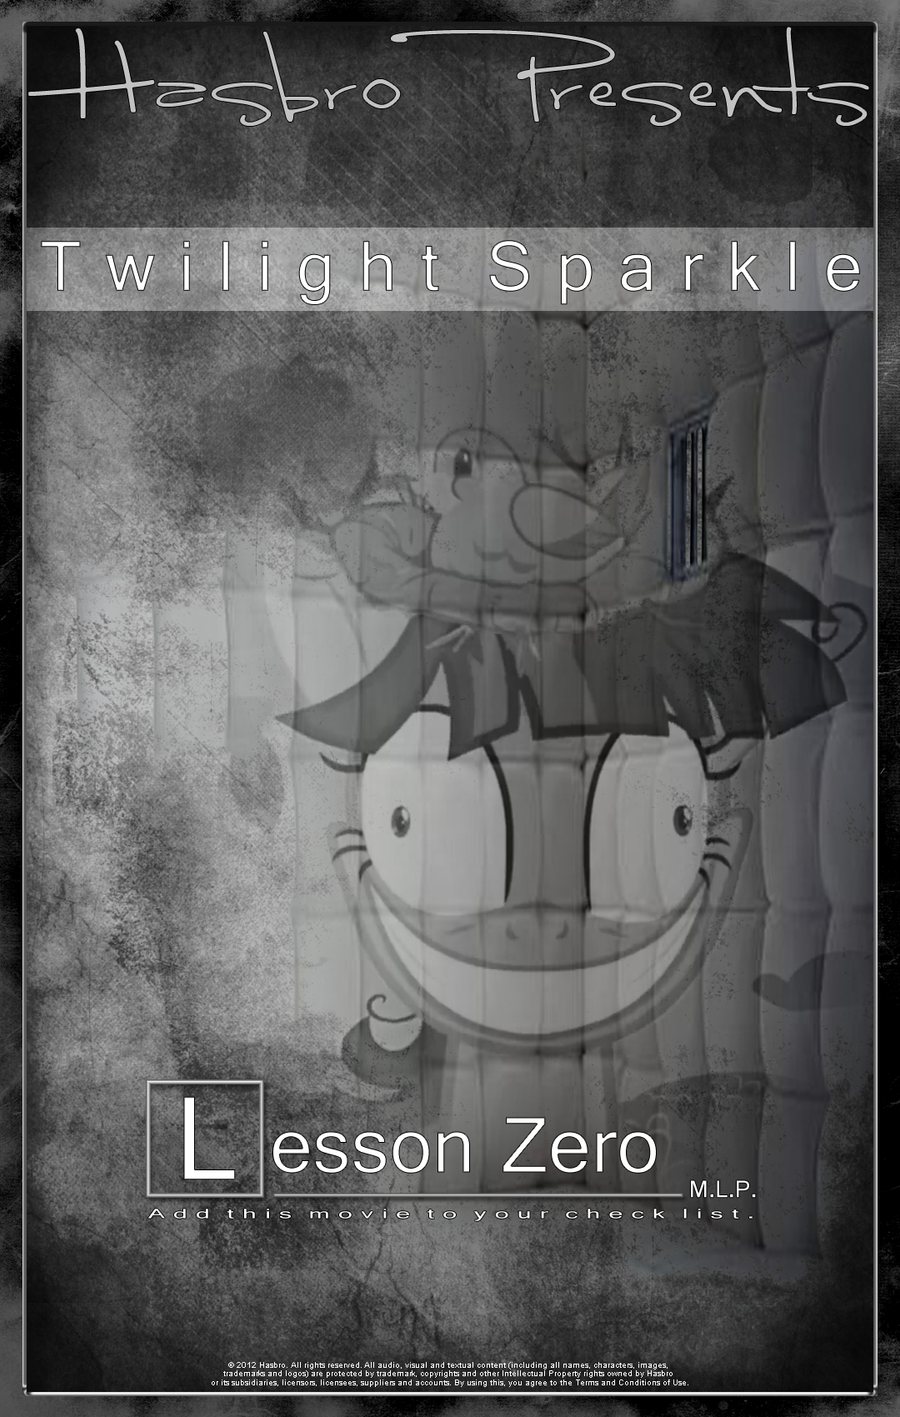 mlp___lesson_zero___movie_poster_by_pims1978-d52gt1w.png